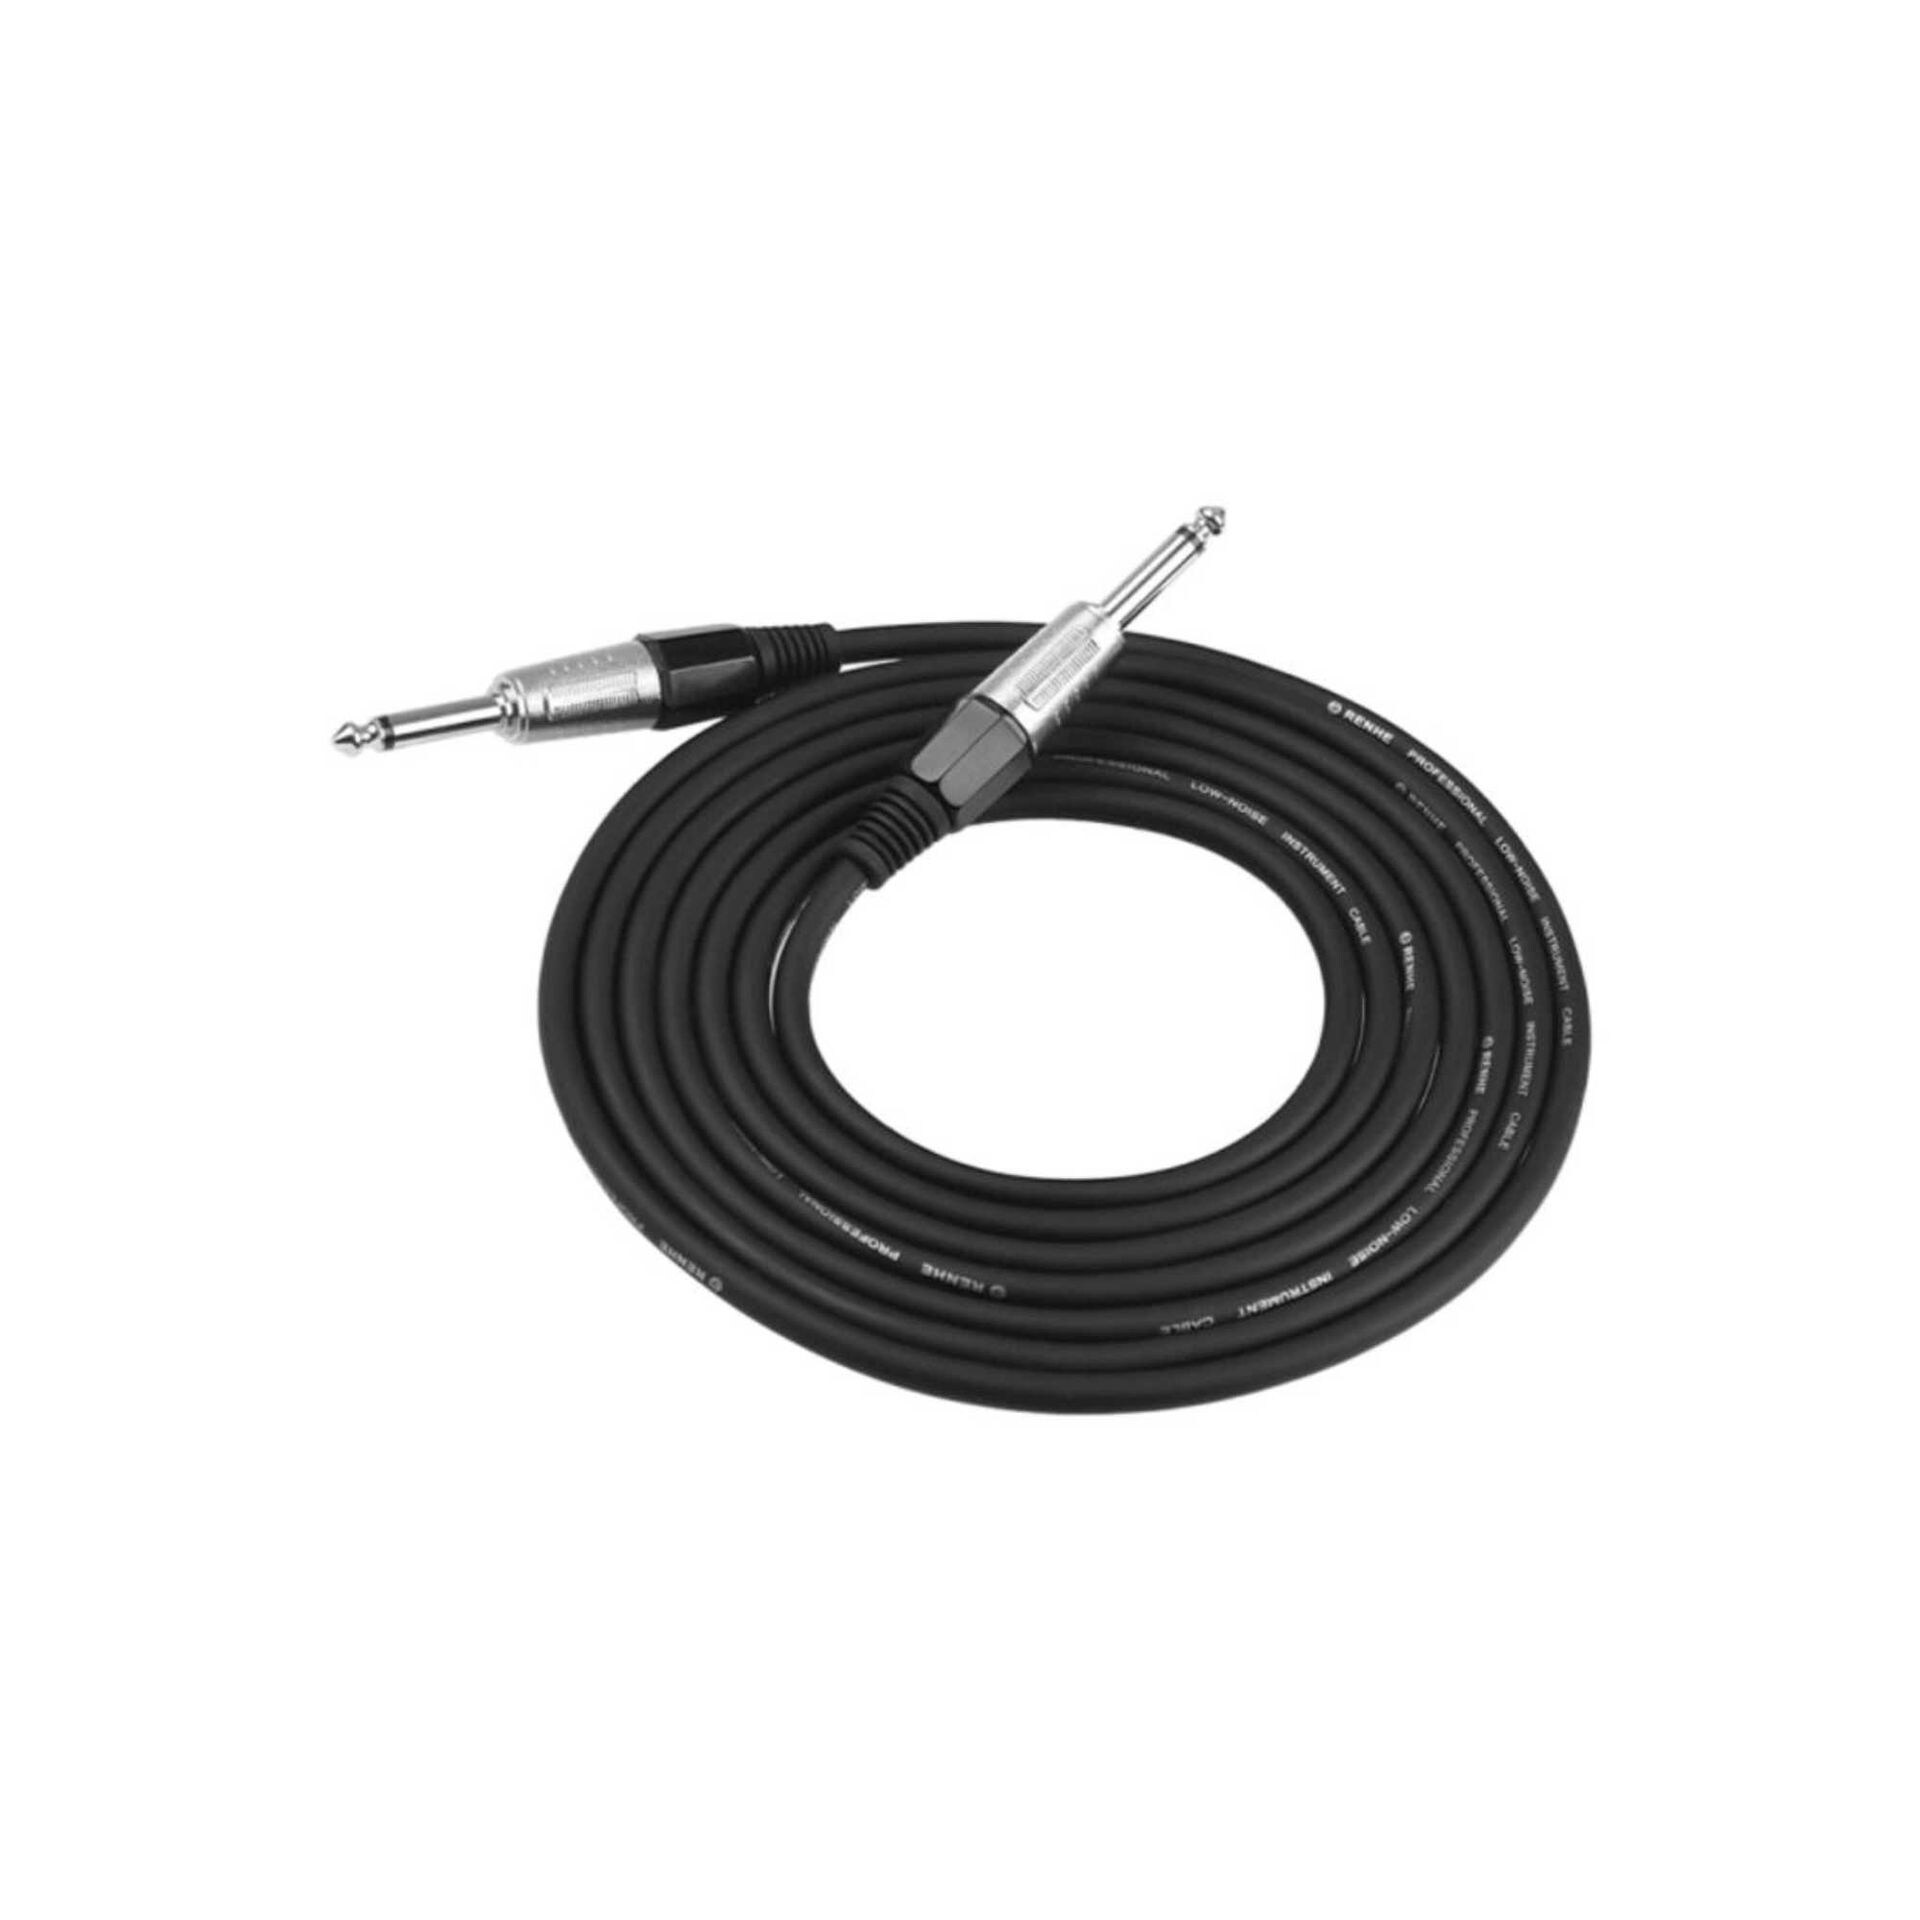 Rkn Electronics Audio Cable For Electric/Bass Guitar/Keyboard, 3 Meter